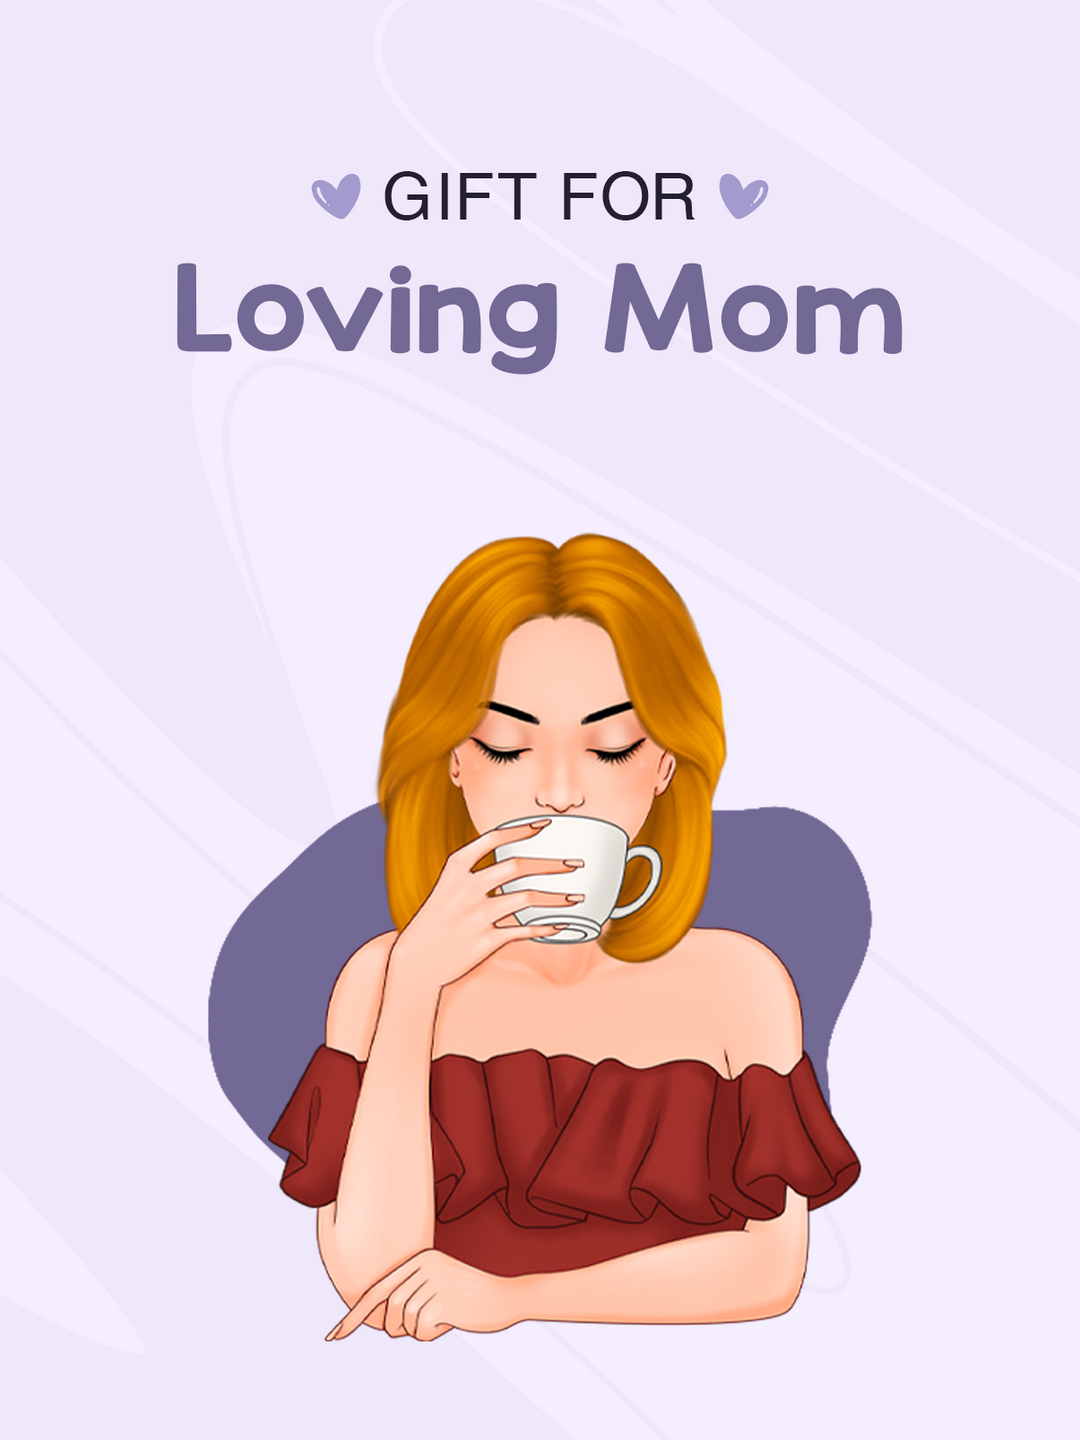 personal house gift for loving mom_5f2a1232 4406 4c22 98ed 2b685b1856af